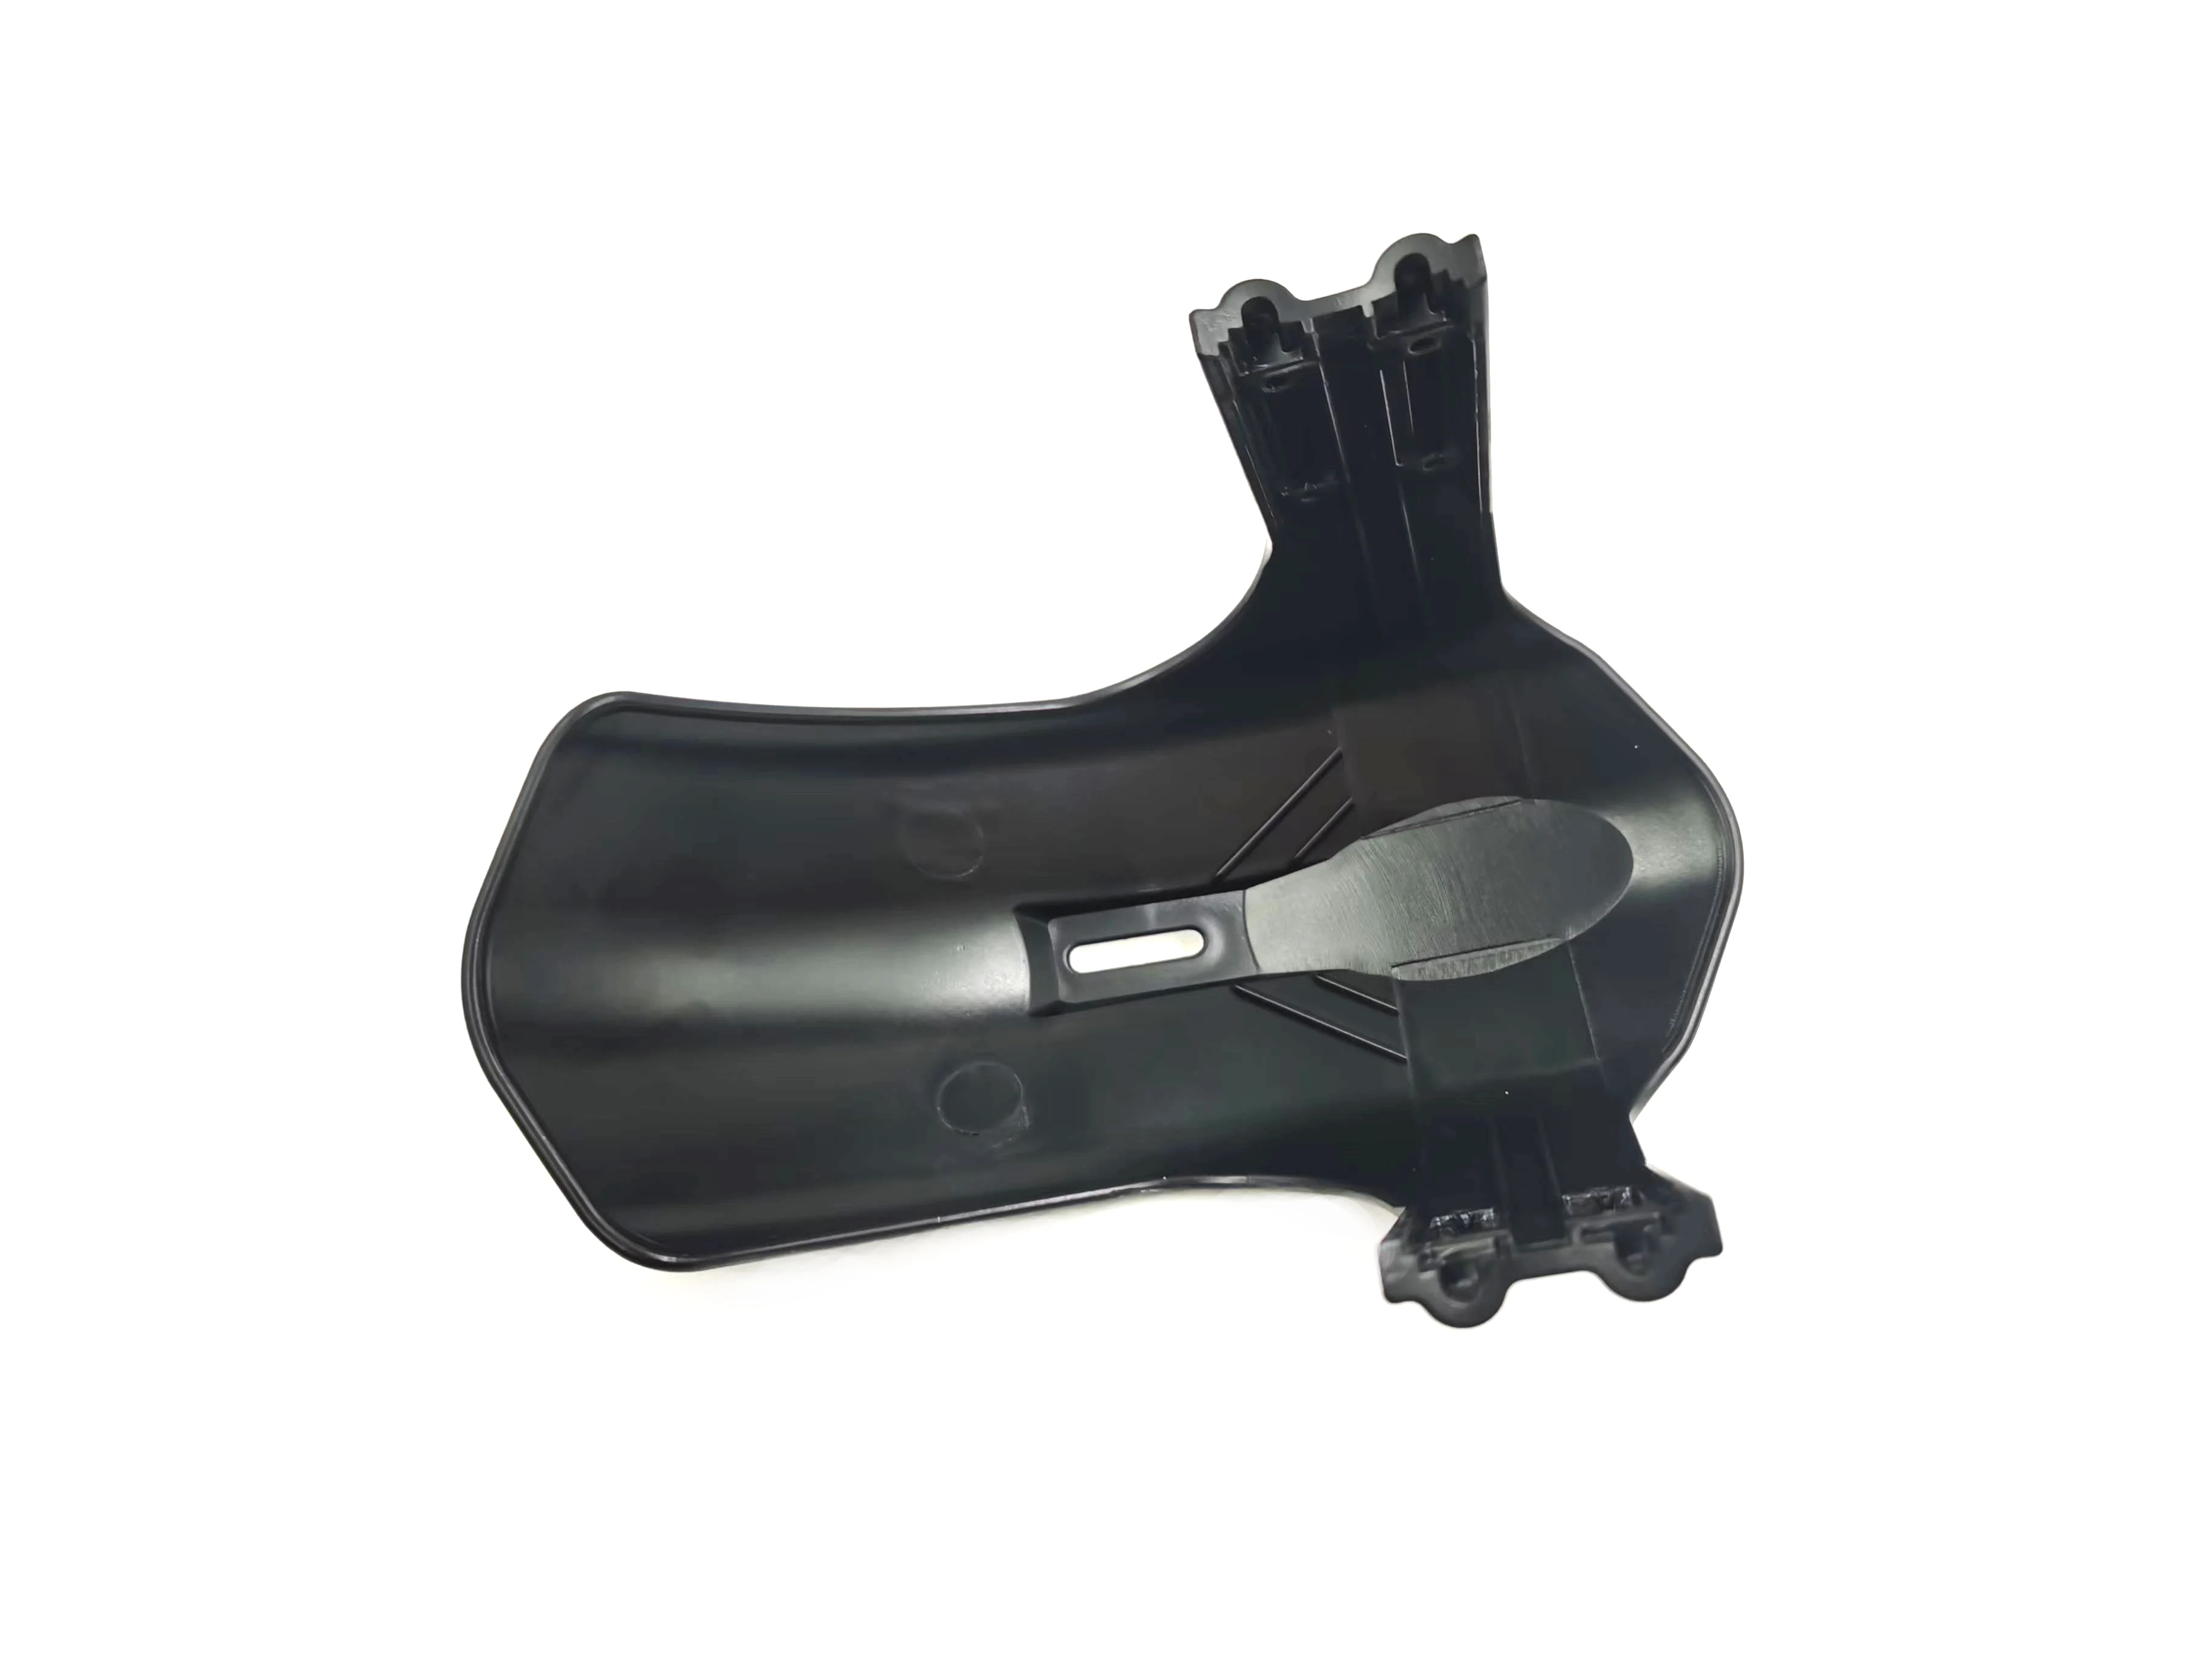 Original G2 PRO Rear Fender Back Mudguard for KUGOO G2 PRO Electric Scooter Kickscooter Fender Accessories Parts